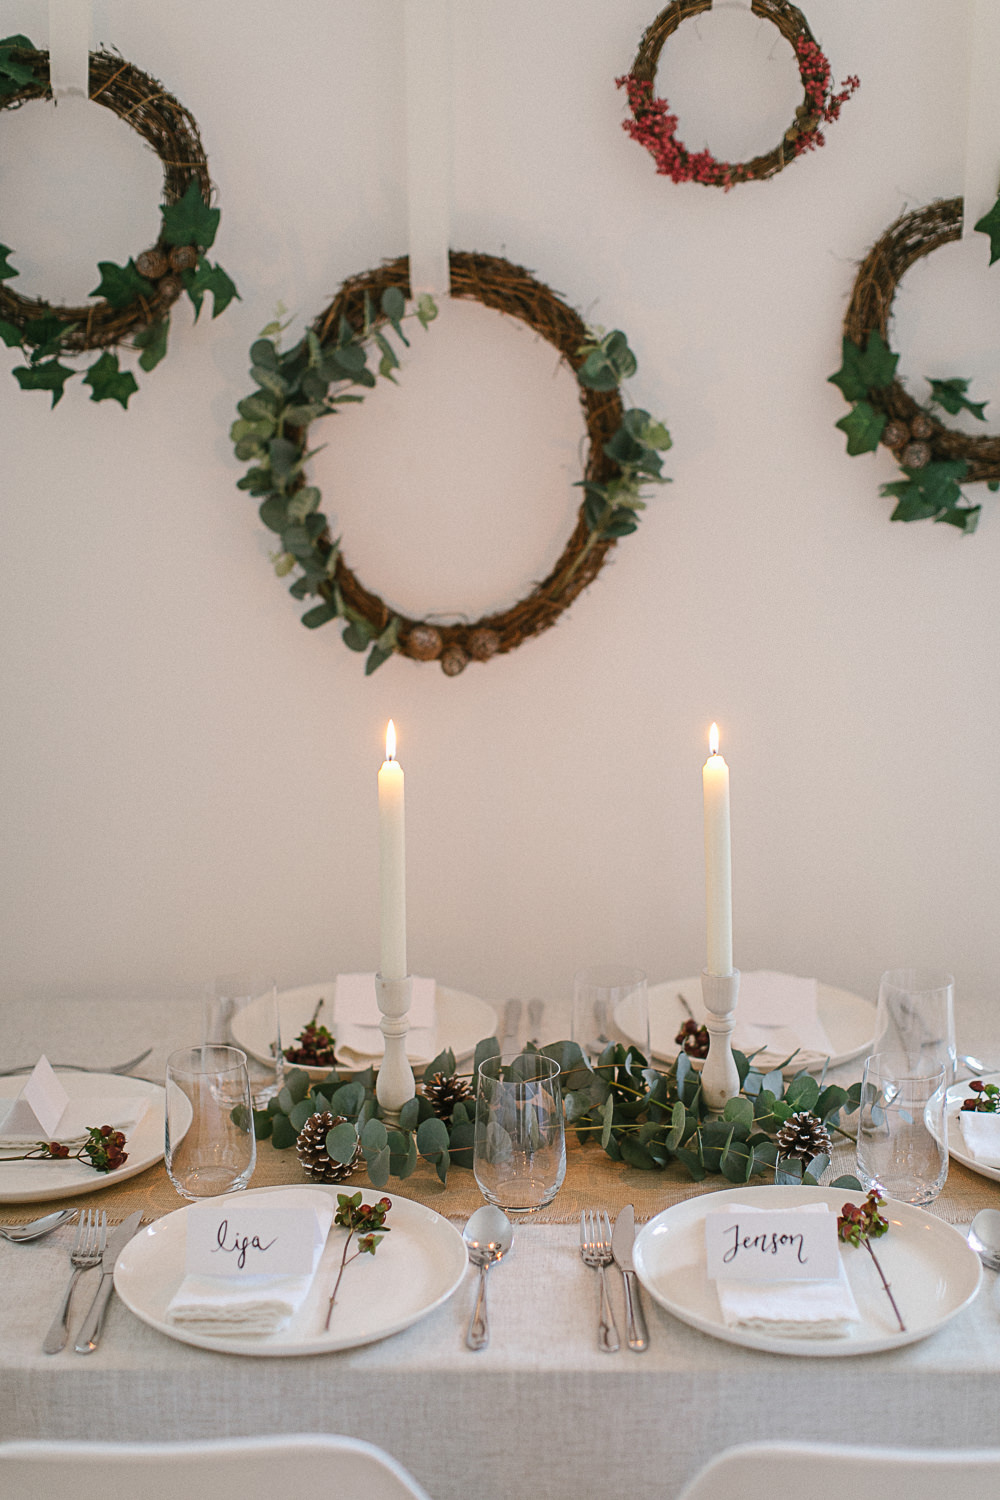 Candlelit Christmas tablescape with festive hanging branch